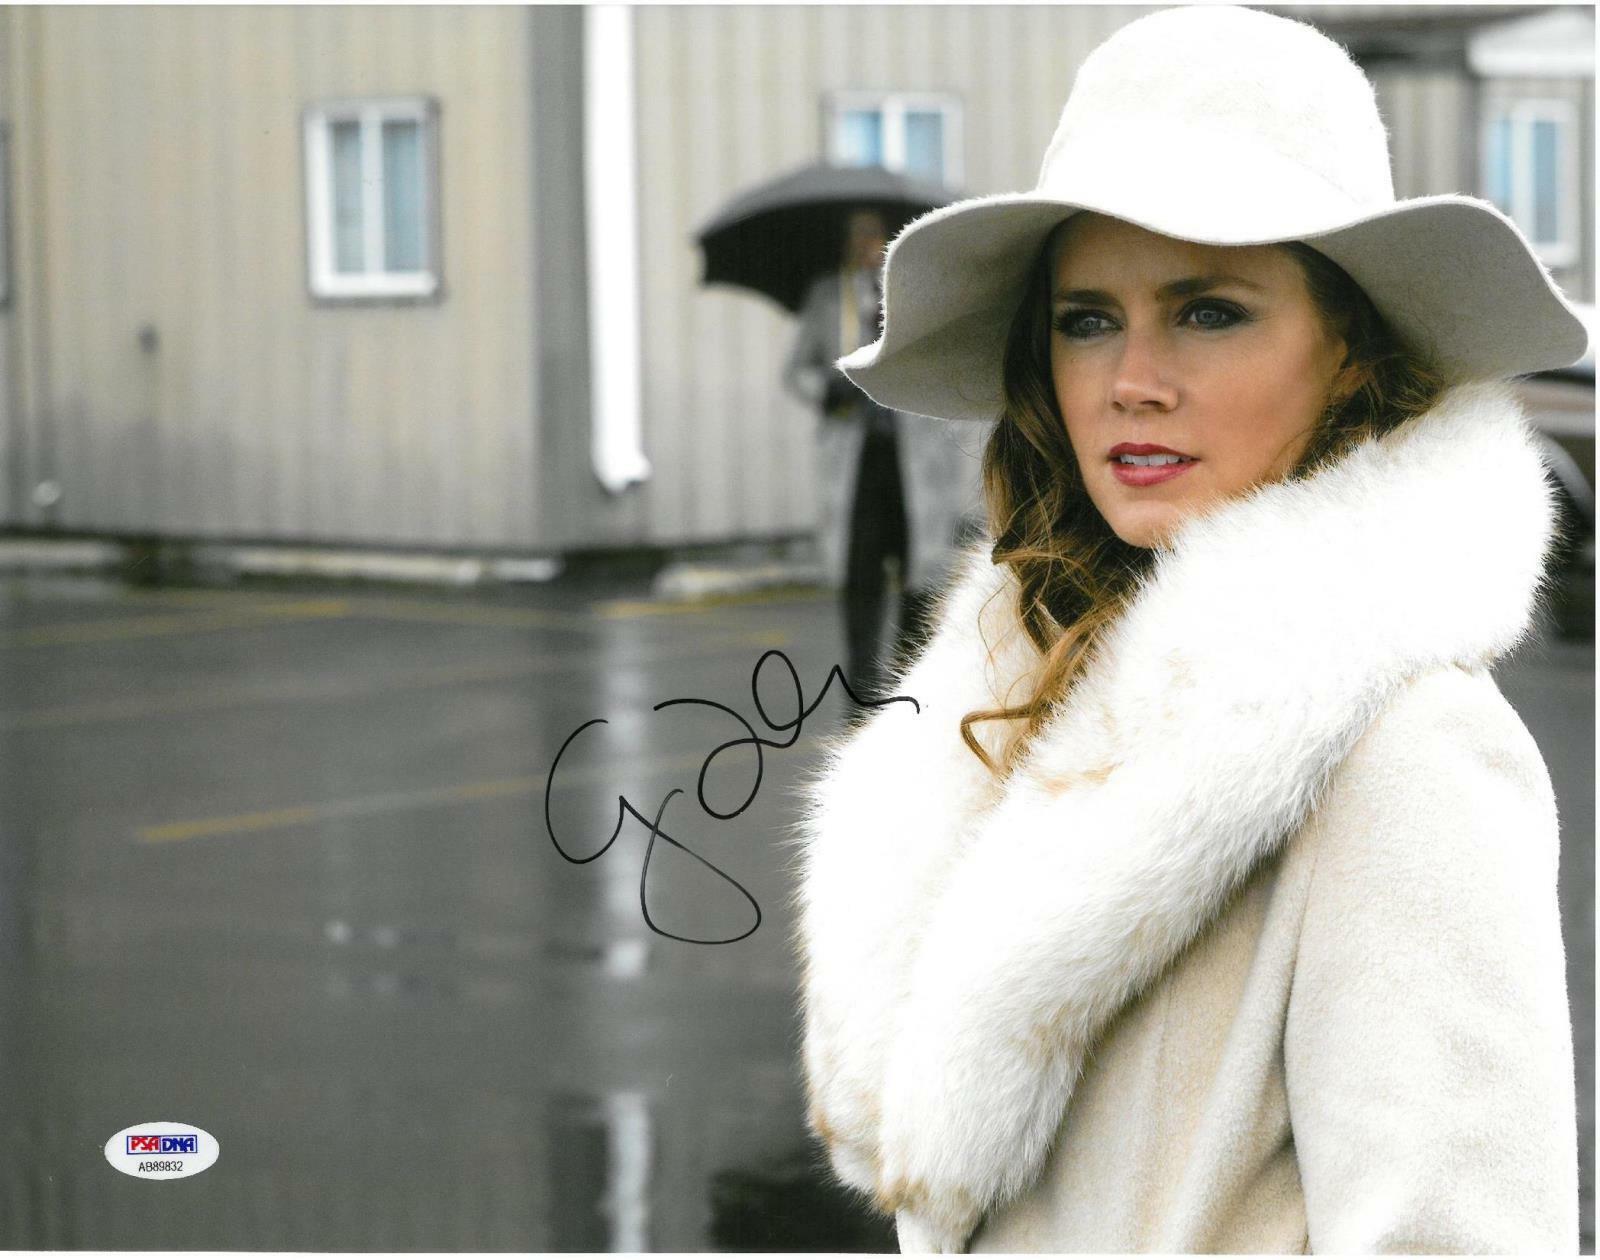 Amy Adams Signed American Hustle Authentic Auto 11x14 Photo Poster painting PSA/DNA #AB89832